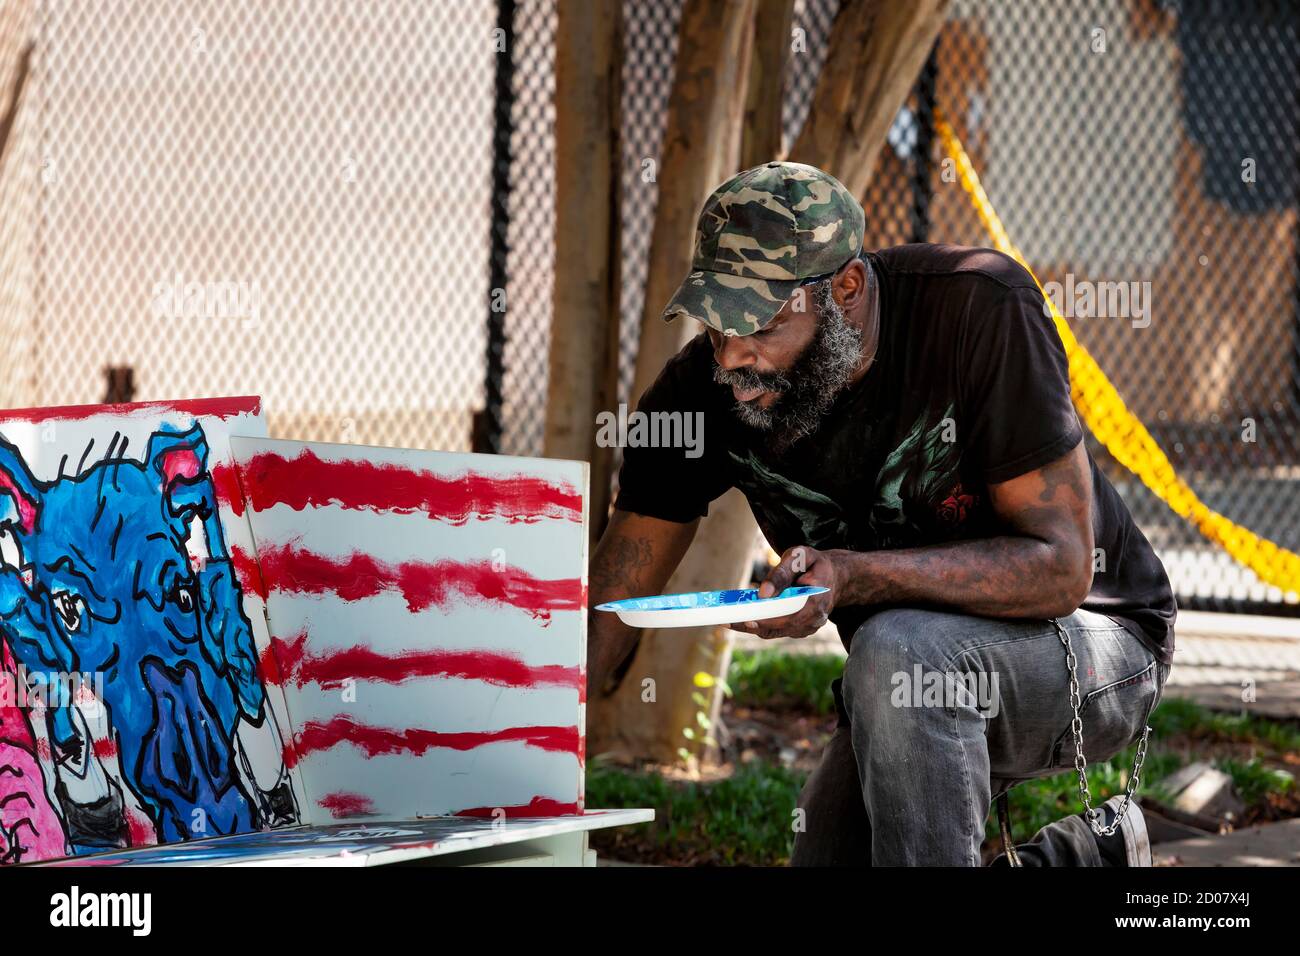 An artist paints a piece of protest art depicting police as pigs against a background with an American flag motif, Washington, DC, United States Stock Photo